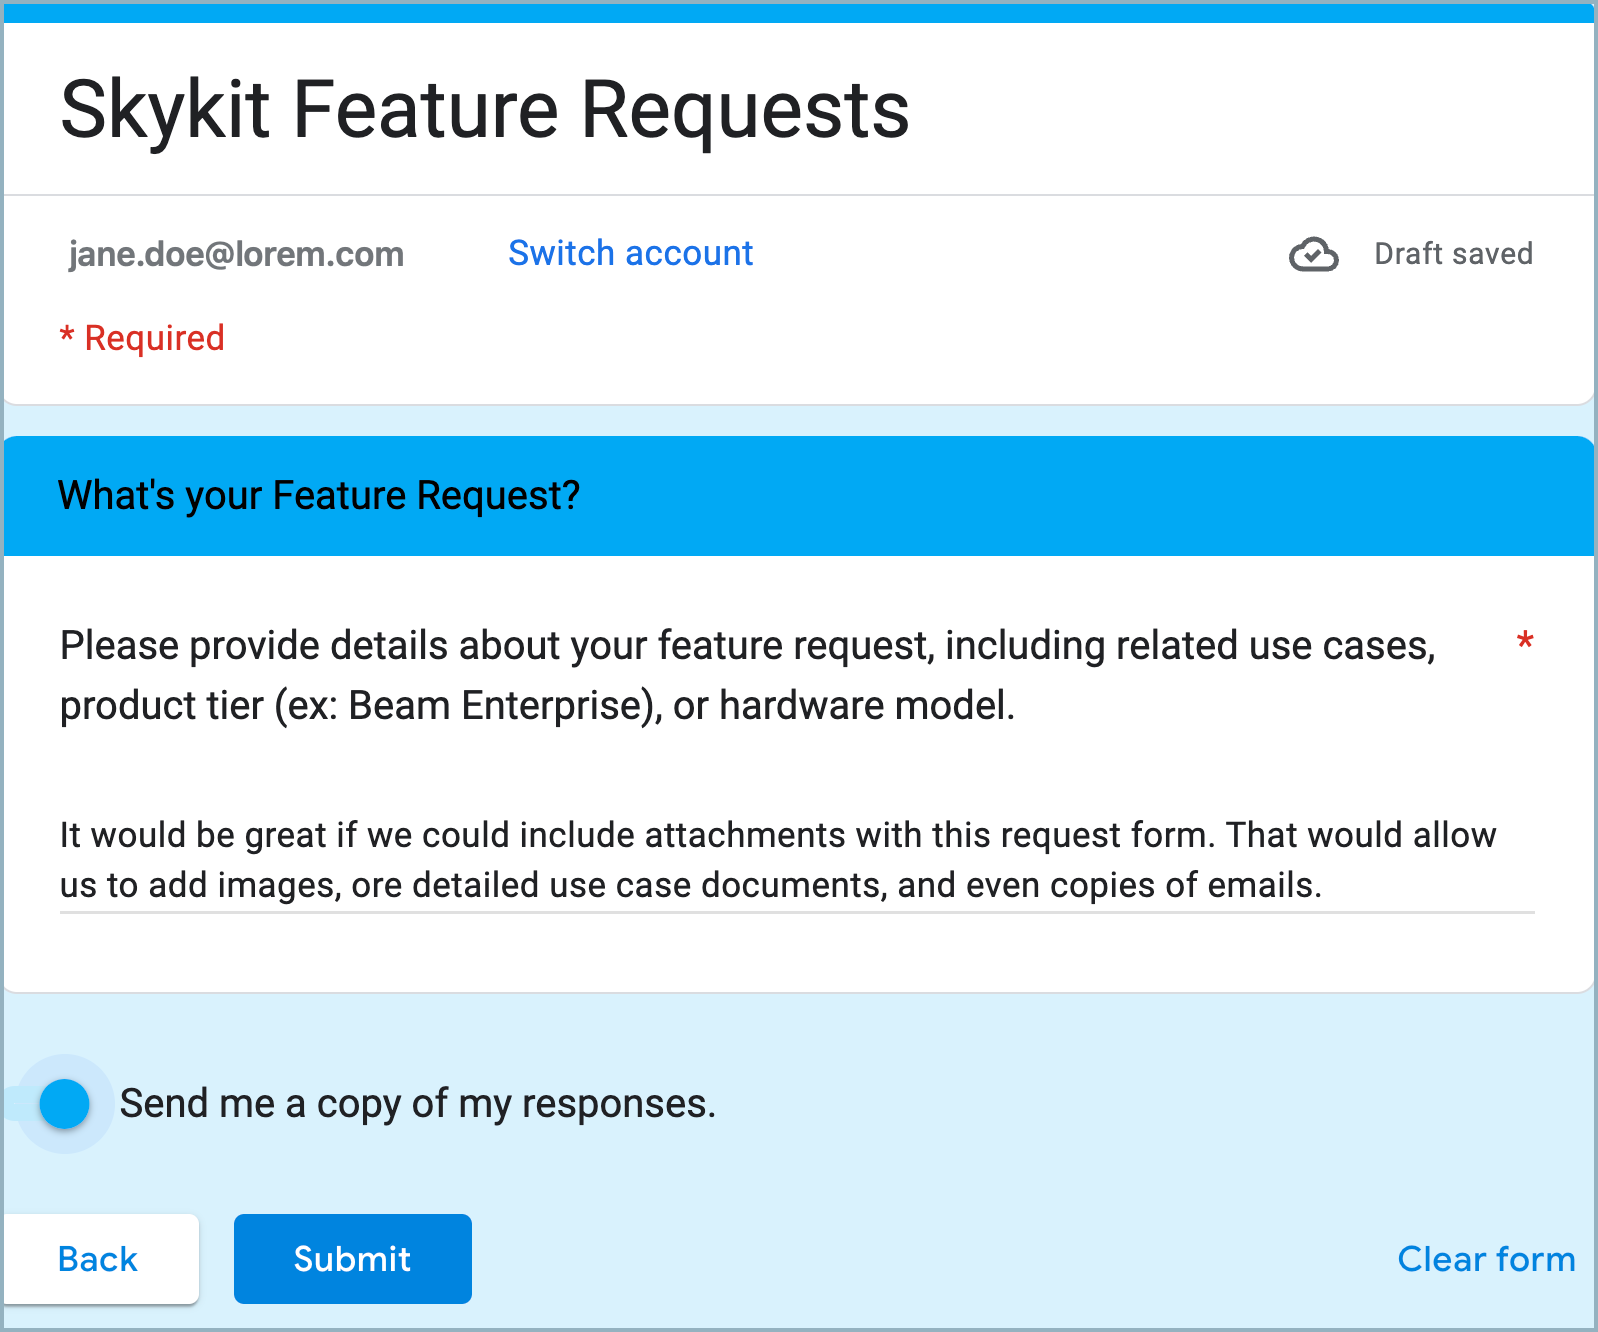 Details of feature request